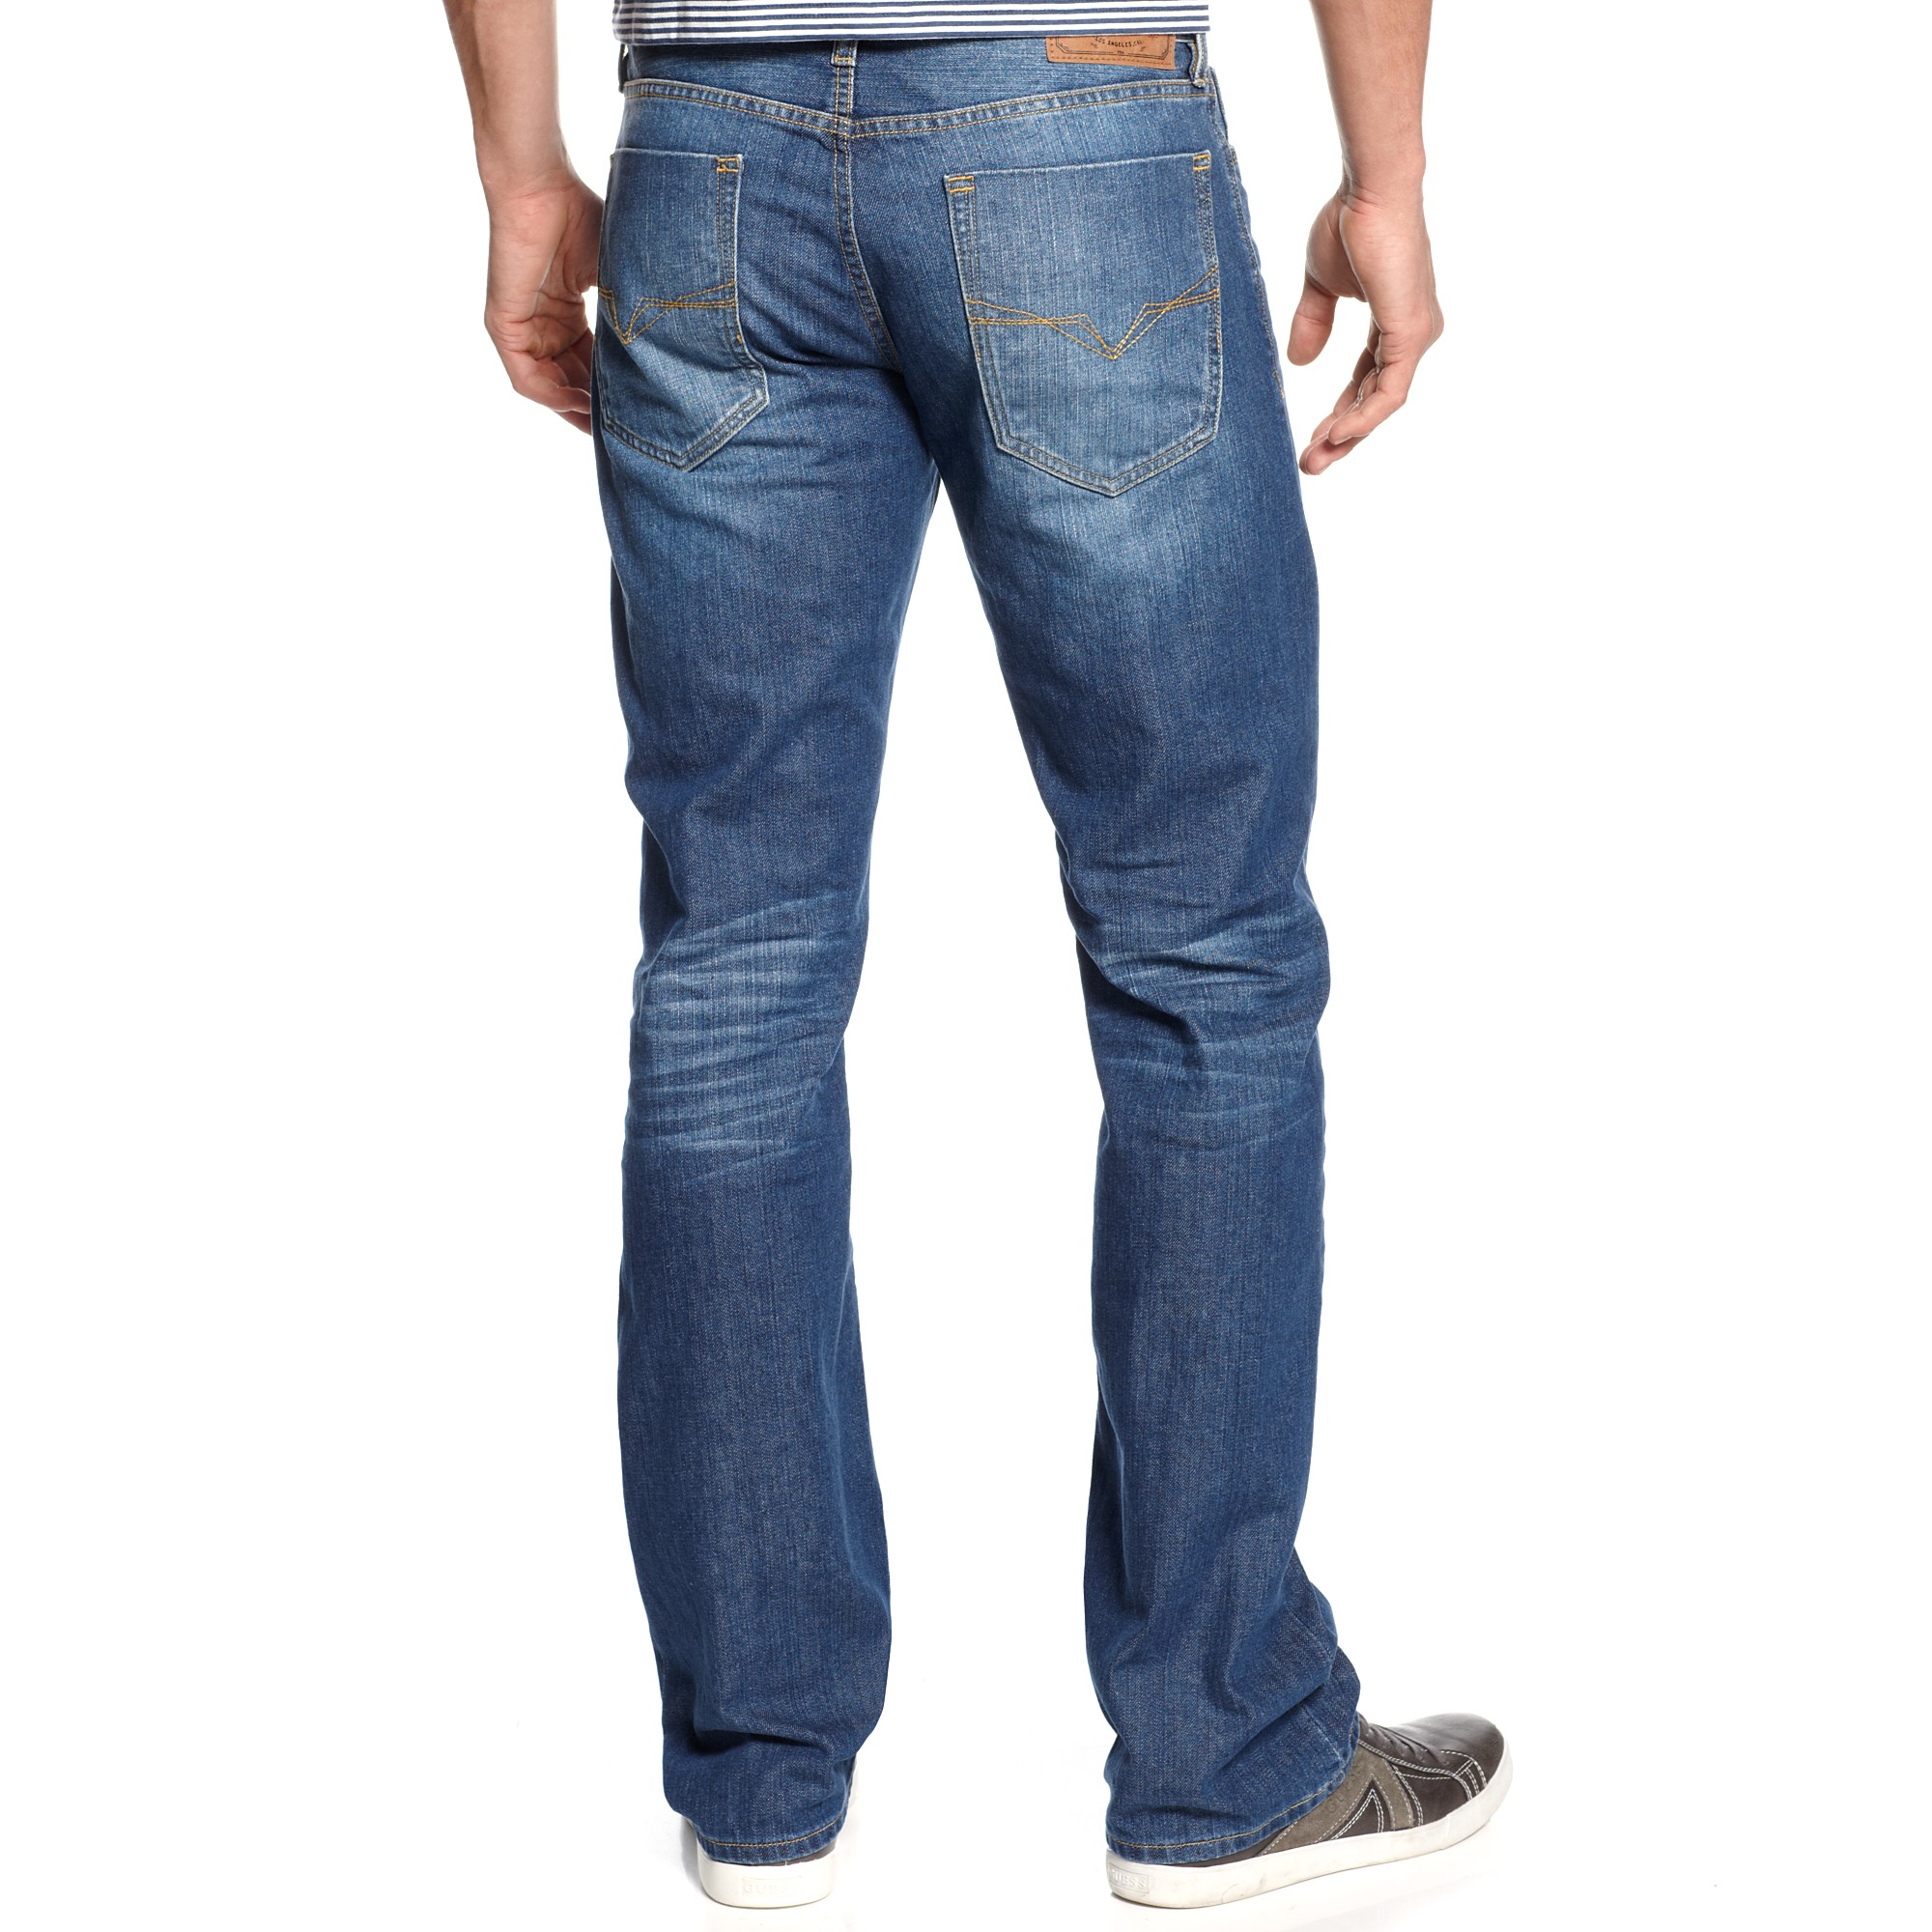 Guess Desmond Relaxed Fit Jeans in Blue 